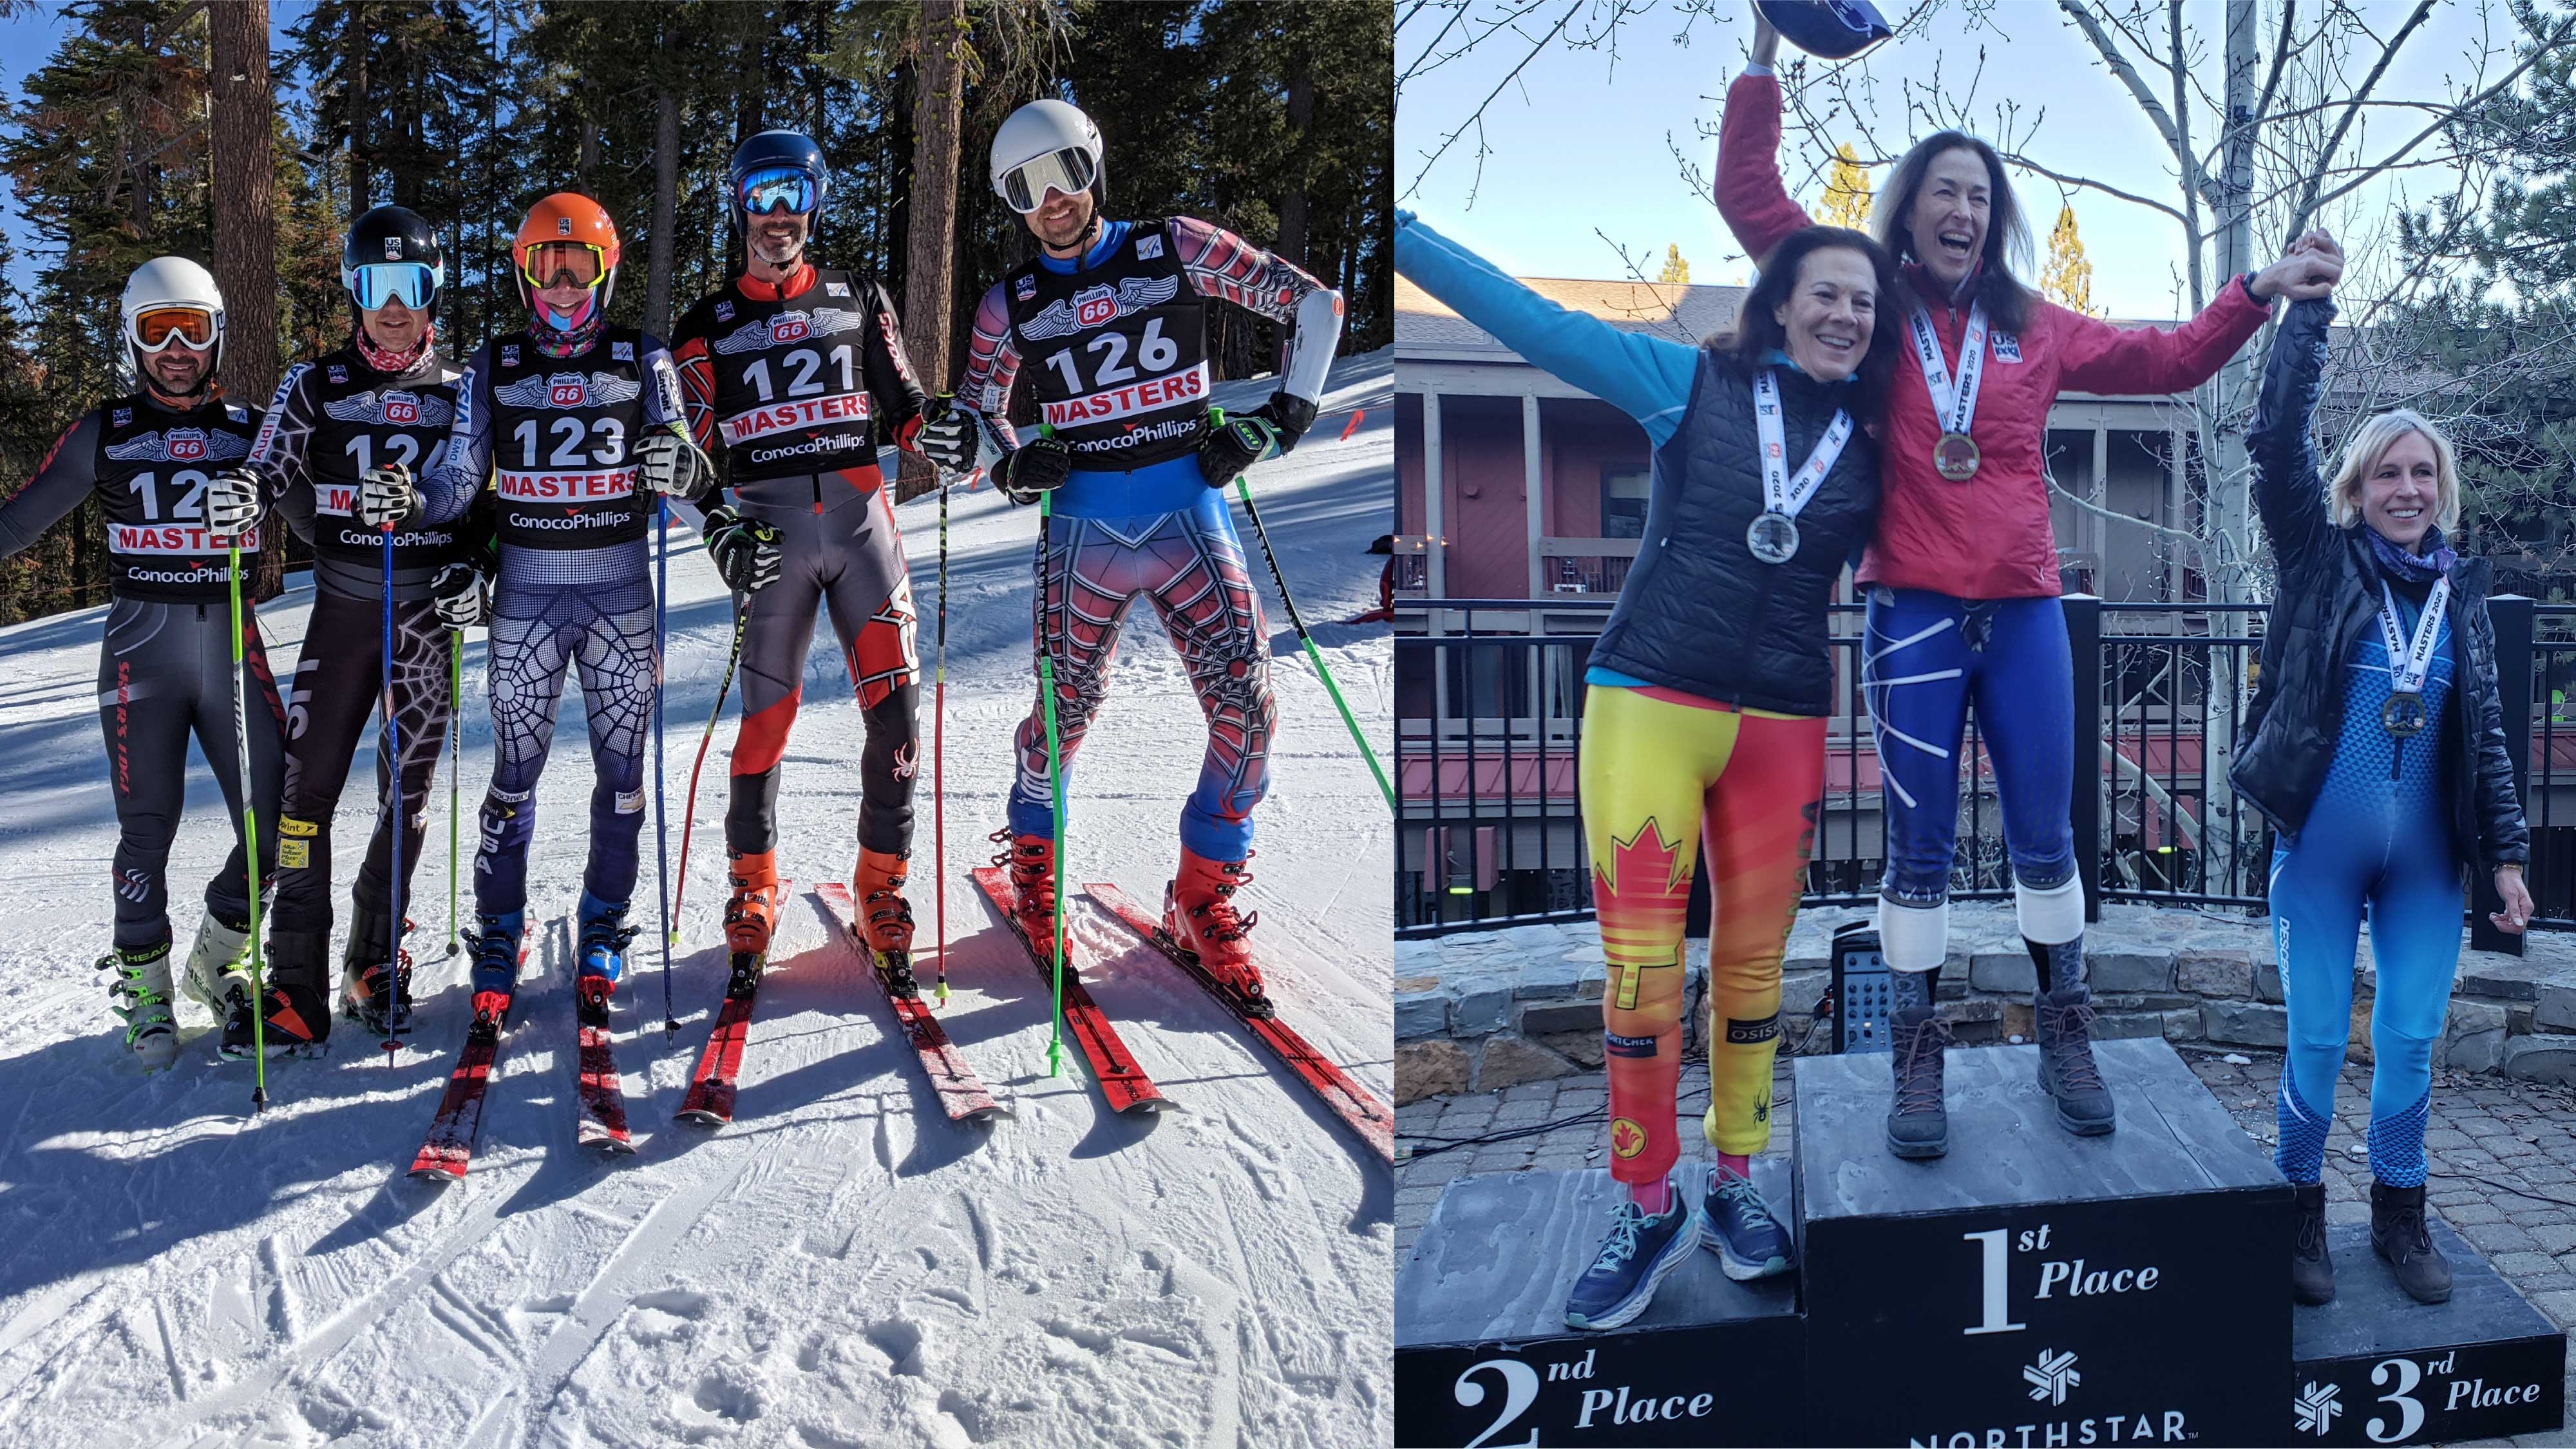 USA FIS Masters Cup at Northstar, CO